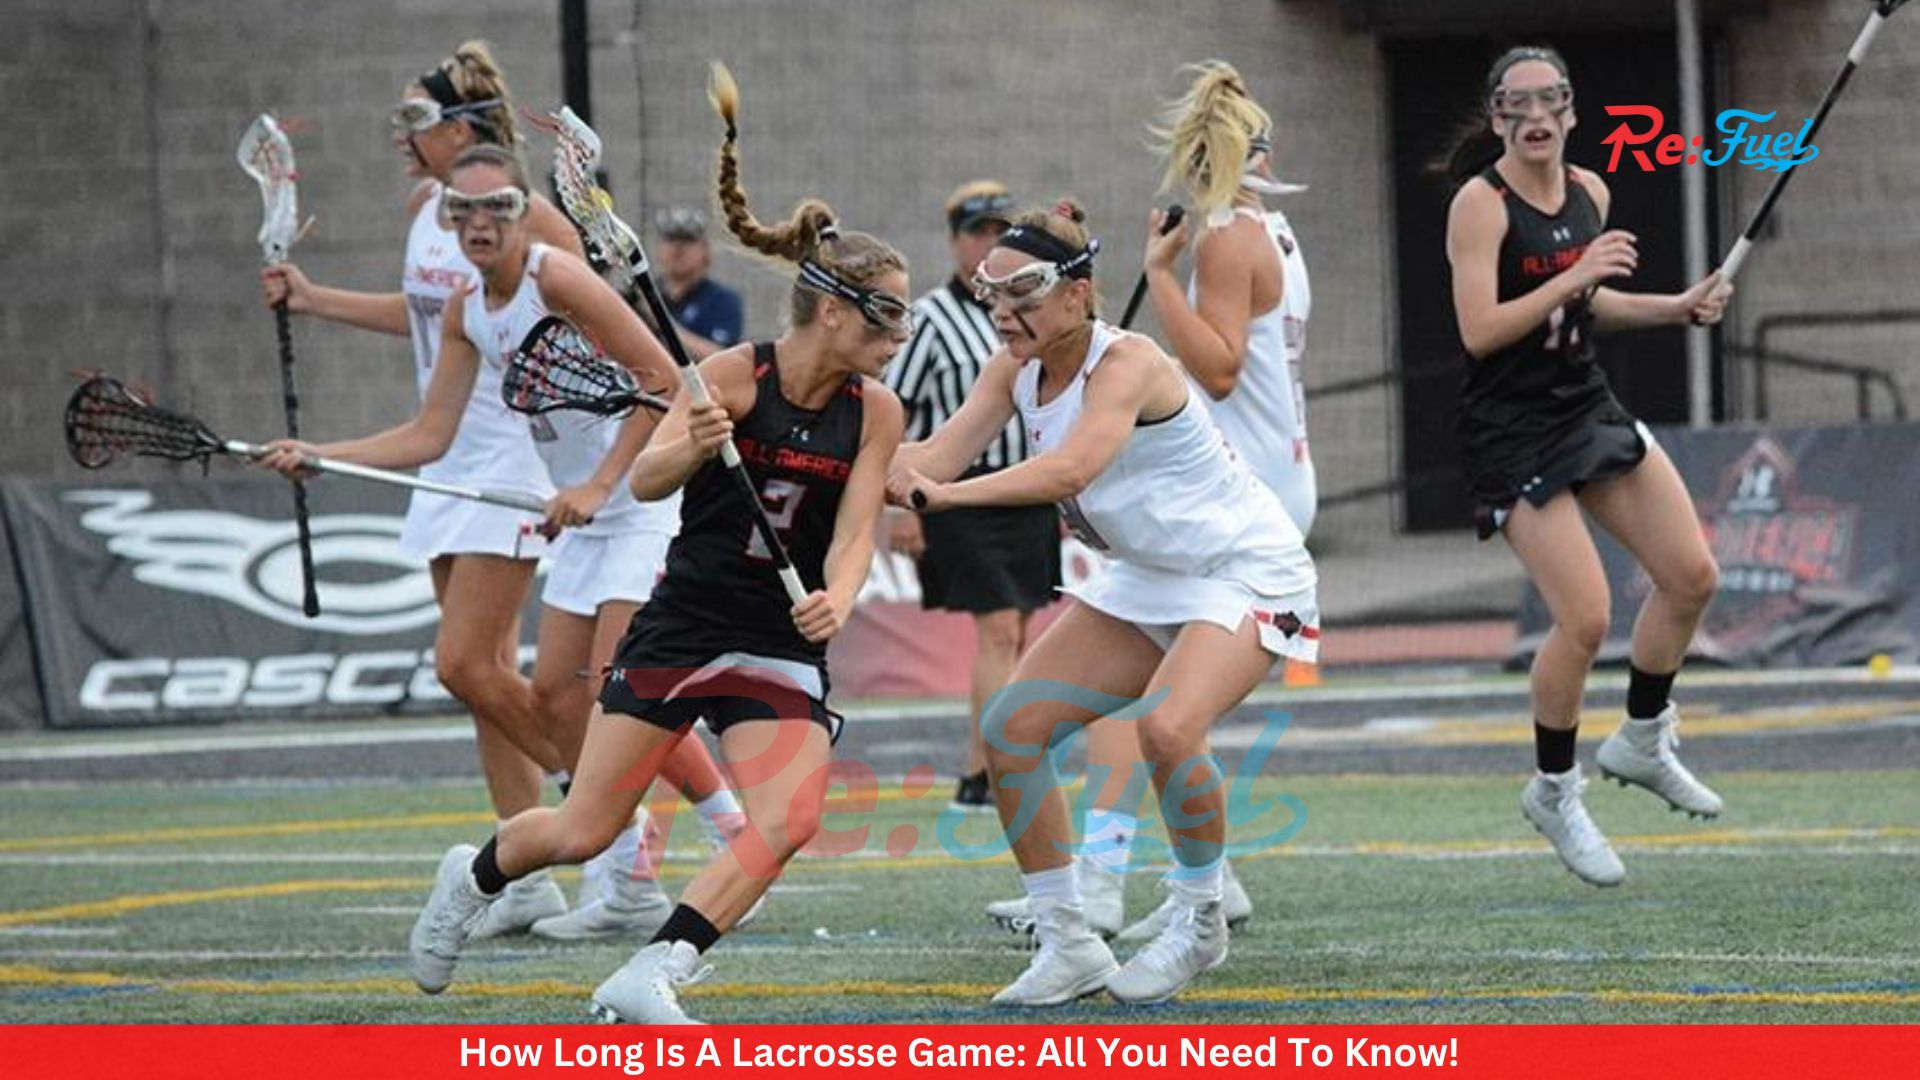 How Long Is A Lacrosse Game: All You Need To Know!